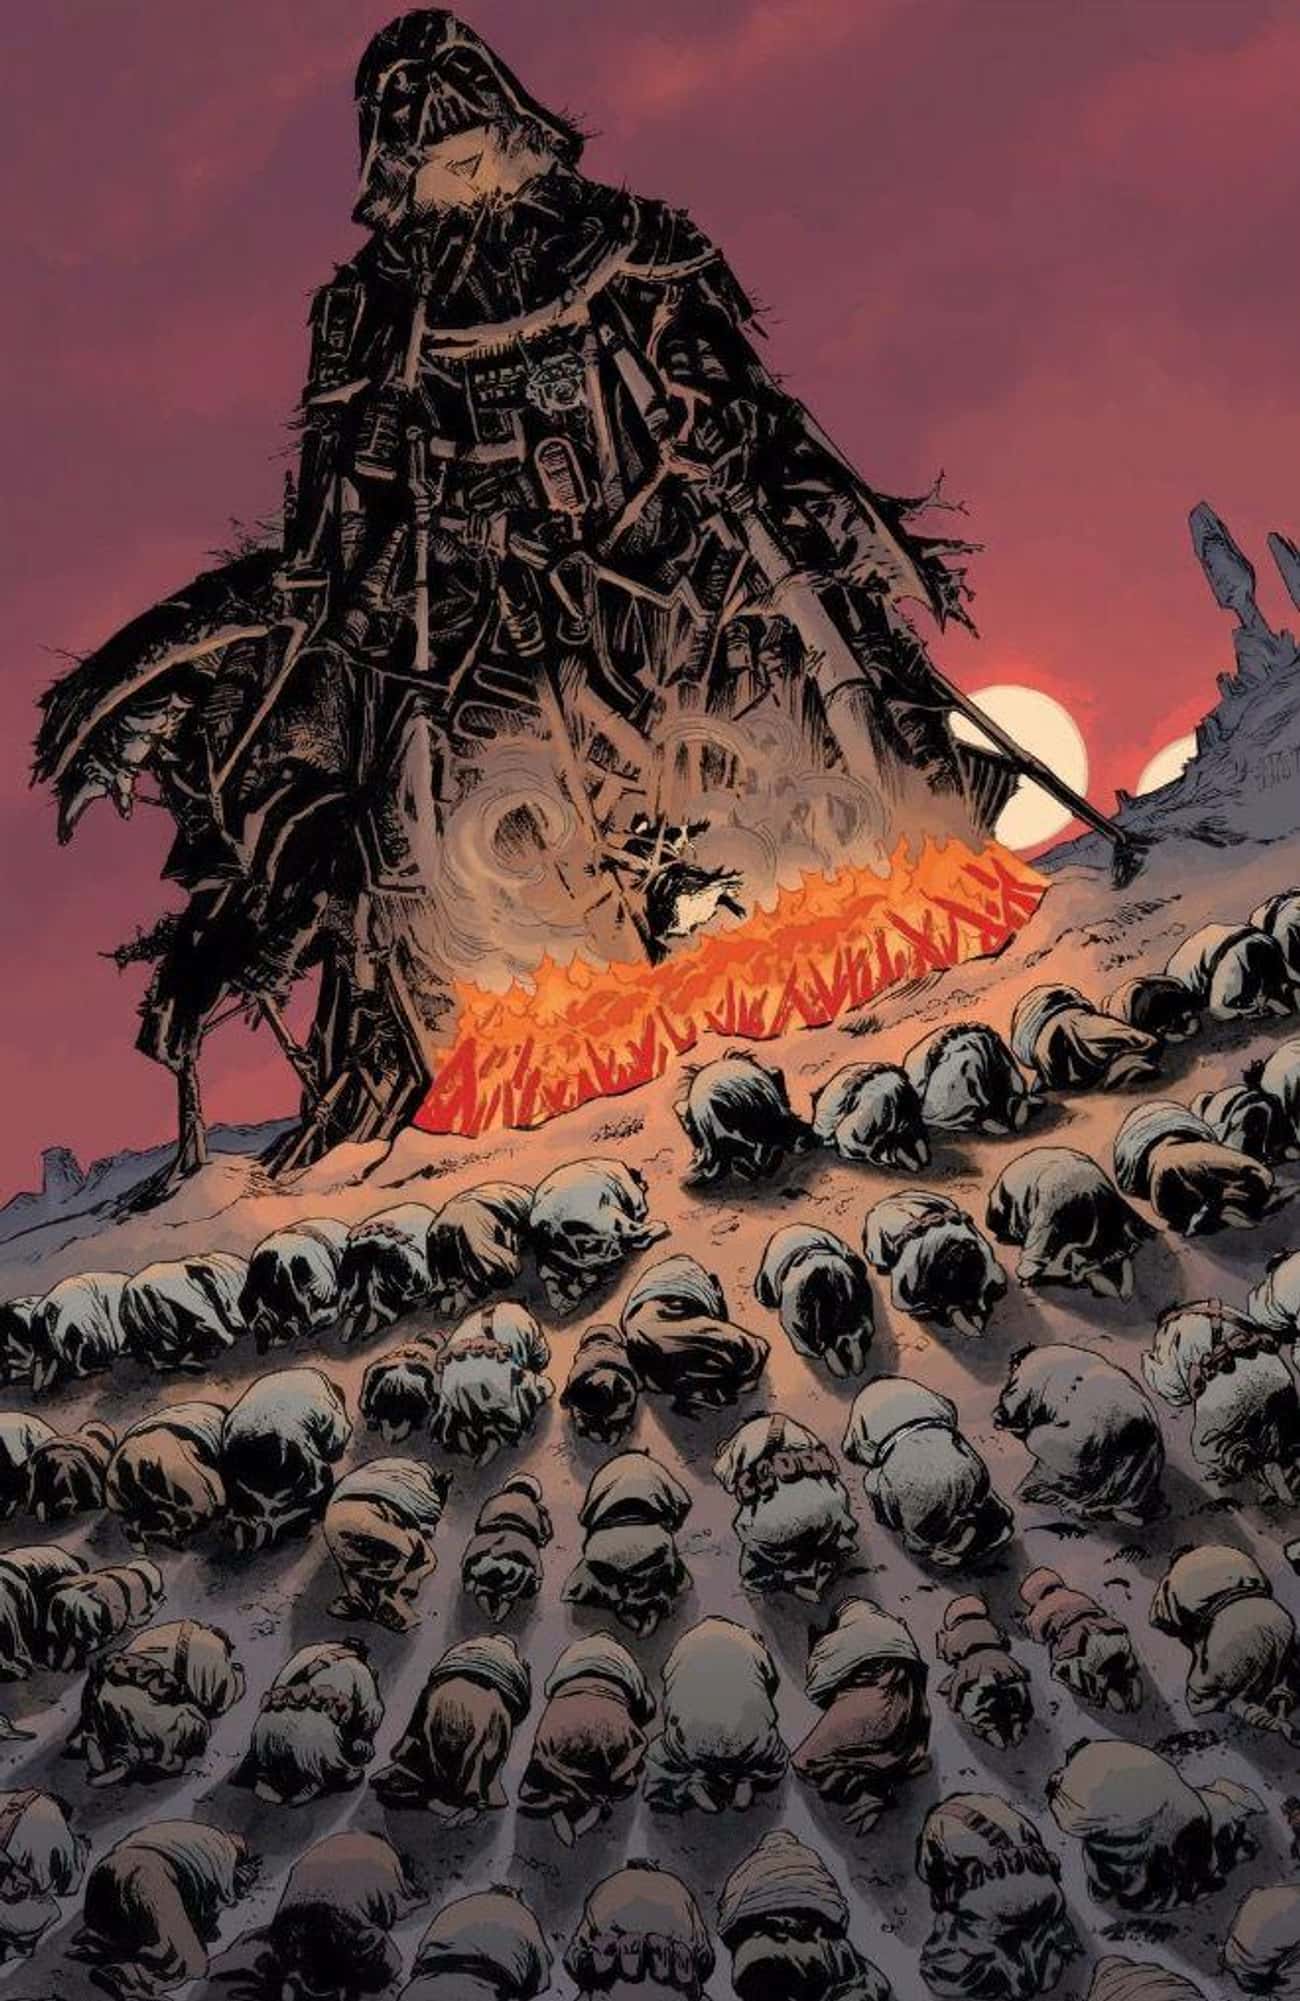  Tusken Raiders Built A Shrine To Darth Vader After Numerous Slaughters